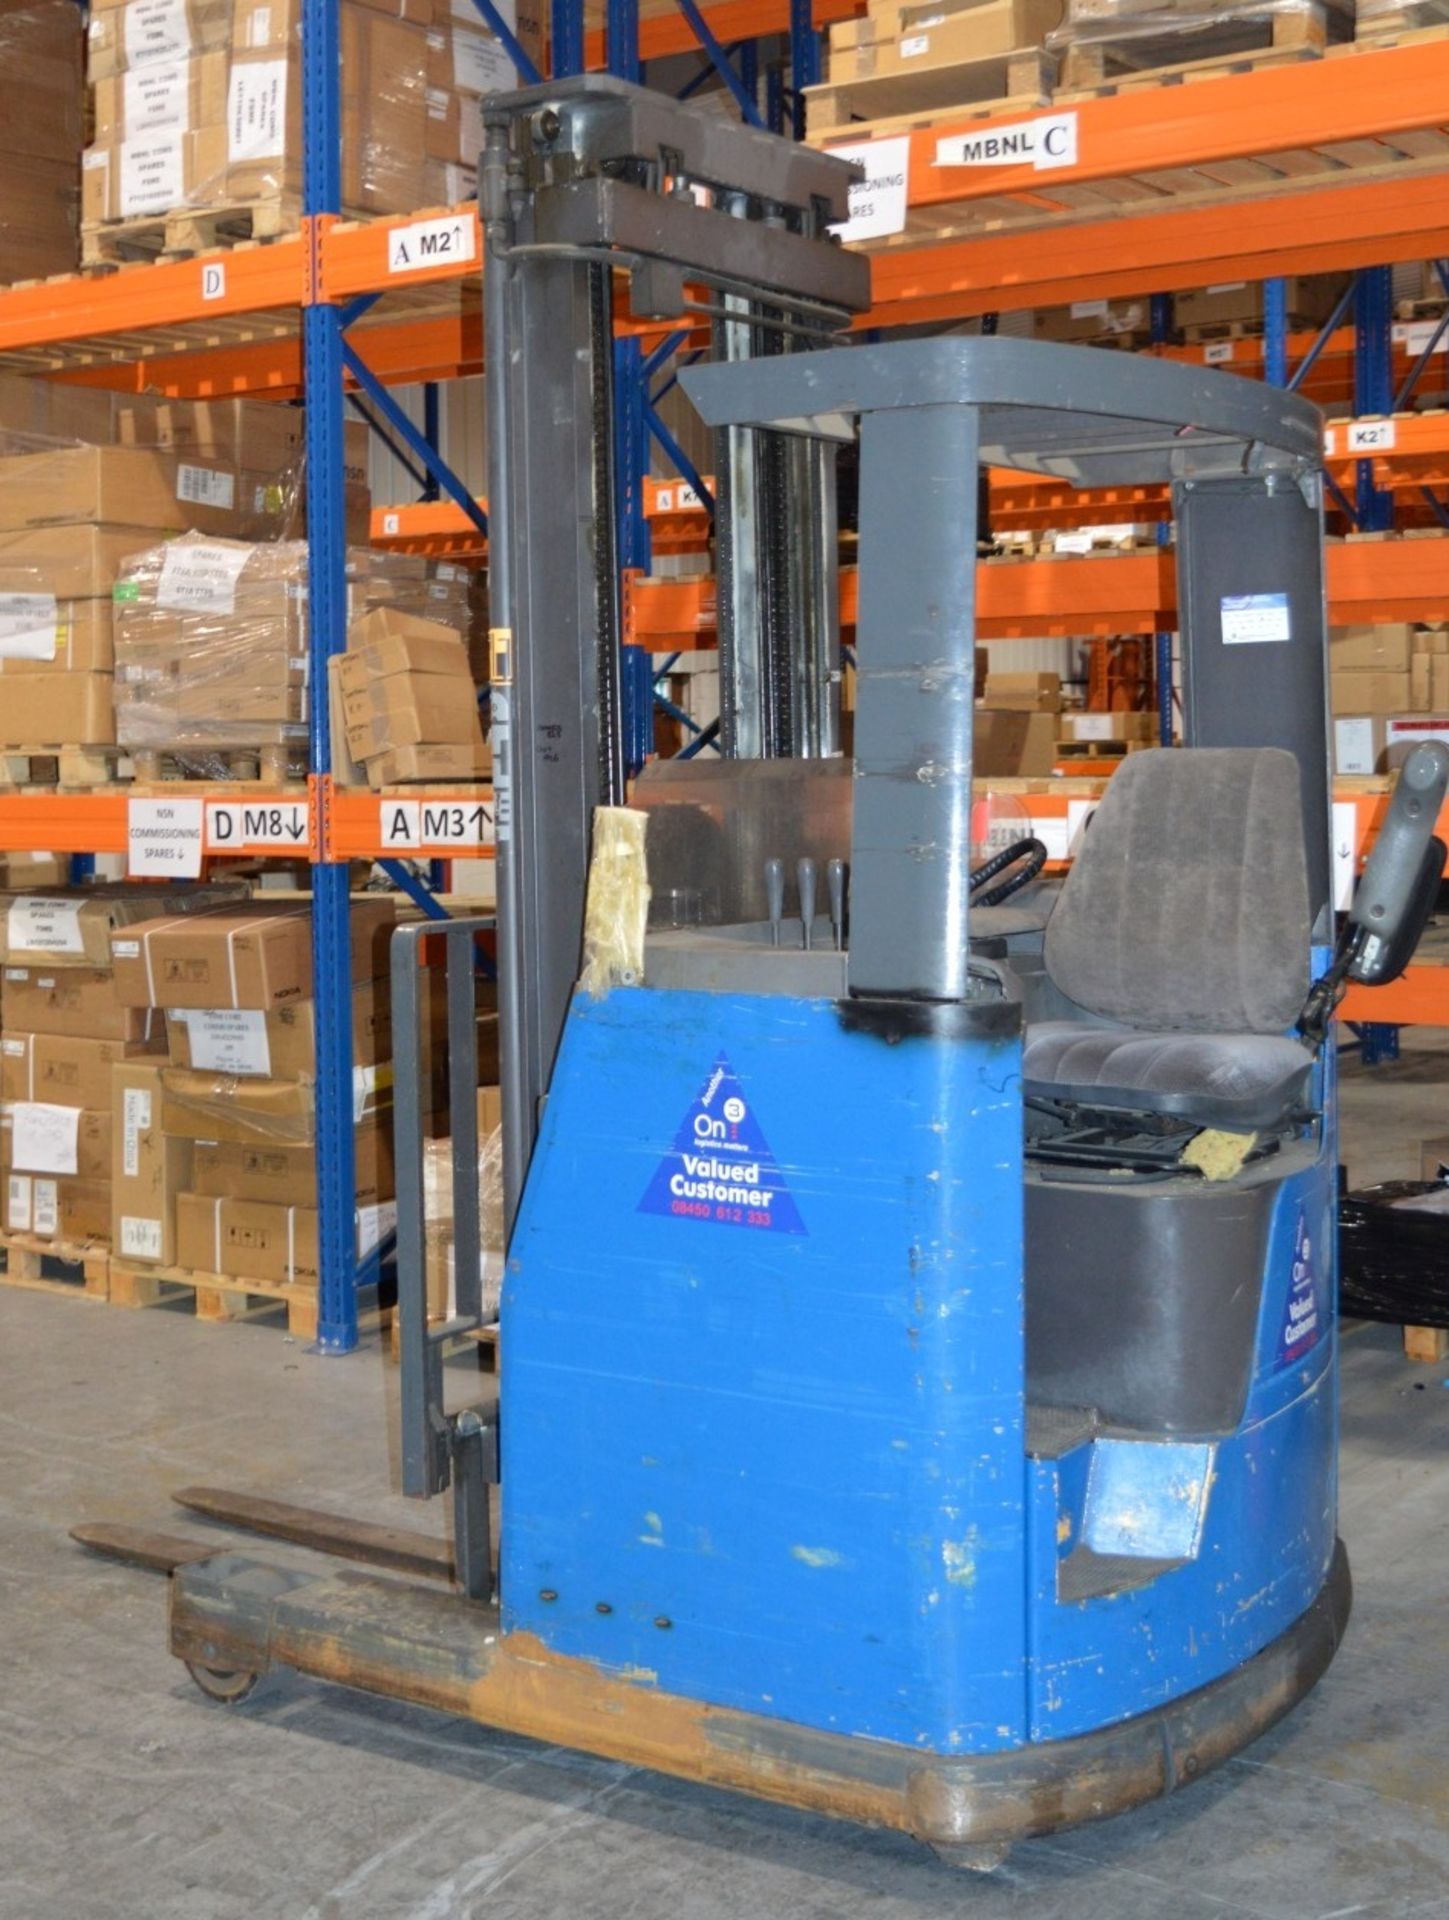 1 x Atlet Electric Forklift Reach Truck - 1994 - Model Atlet Series 2 14 DTFURL 610 UNS - Includes